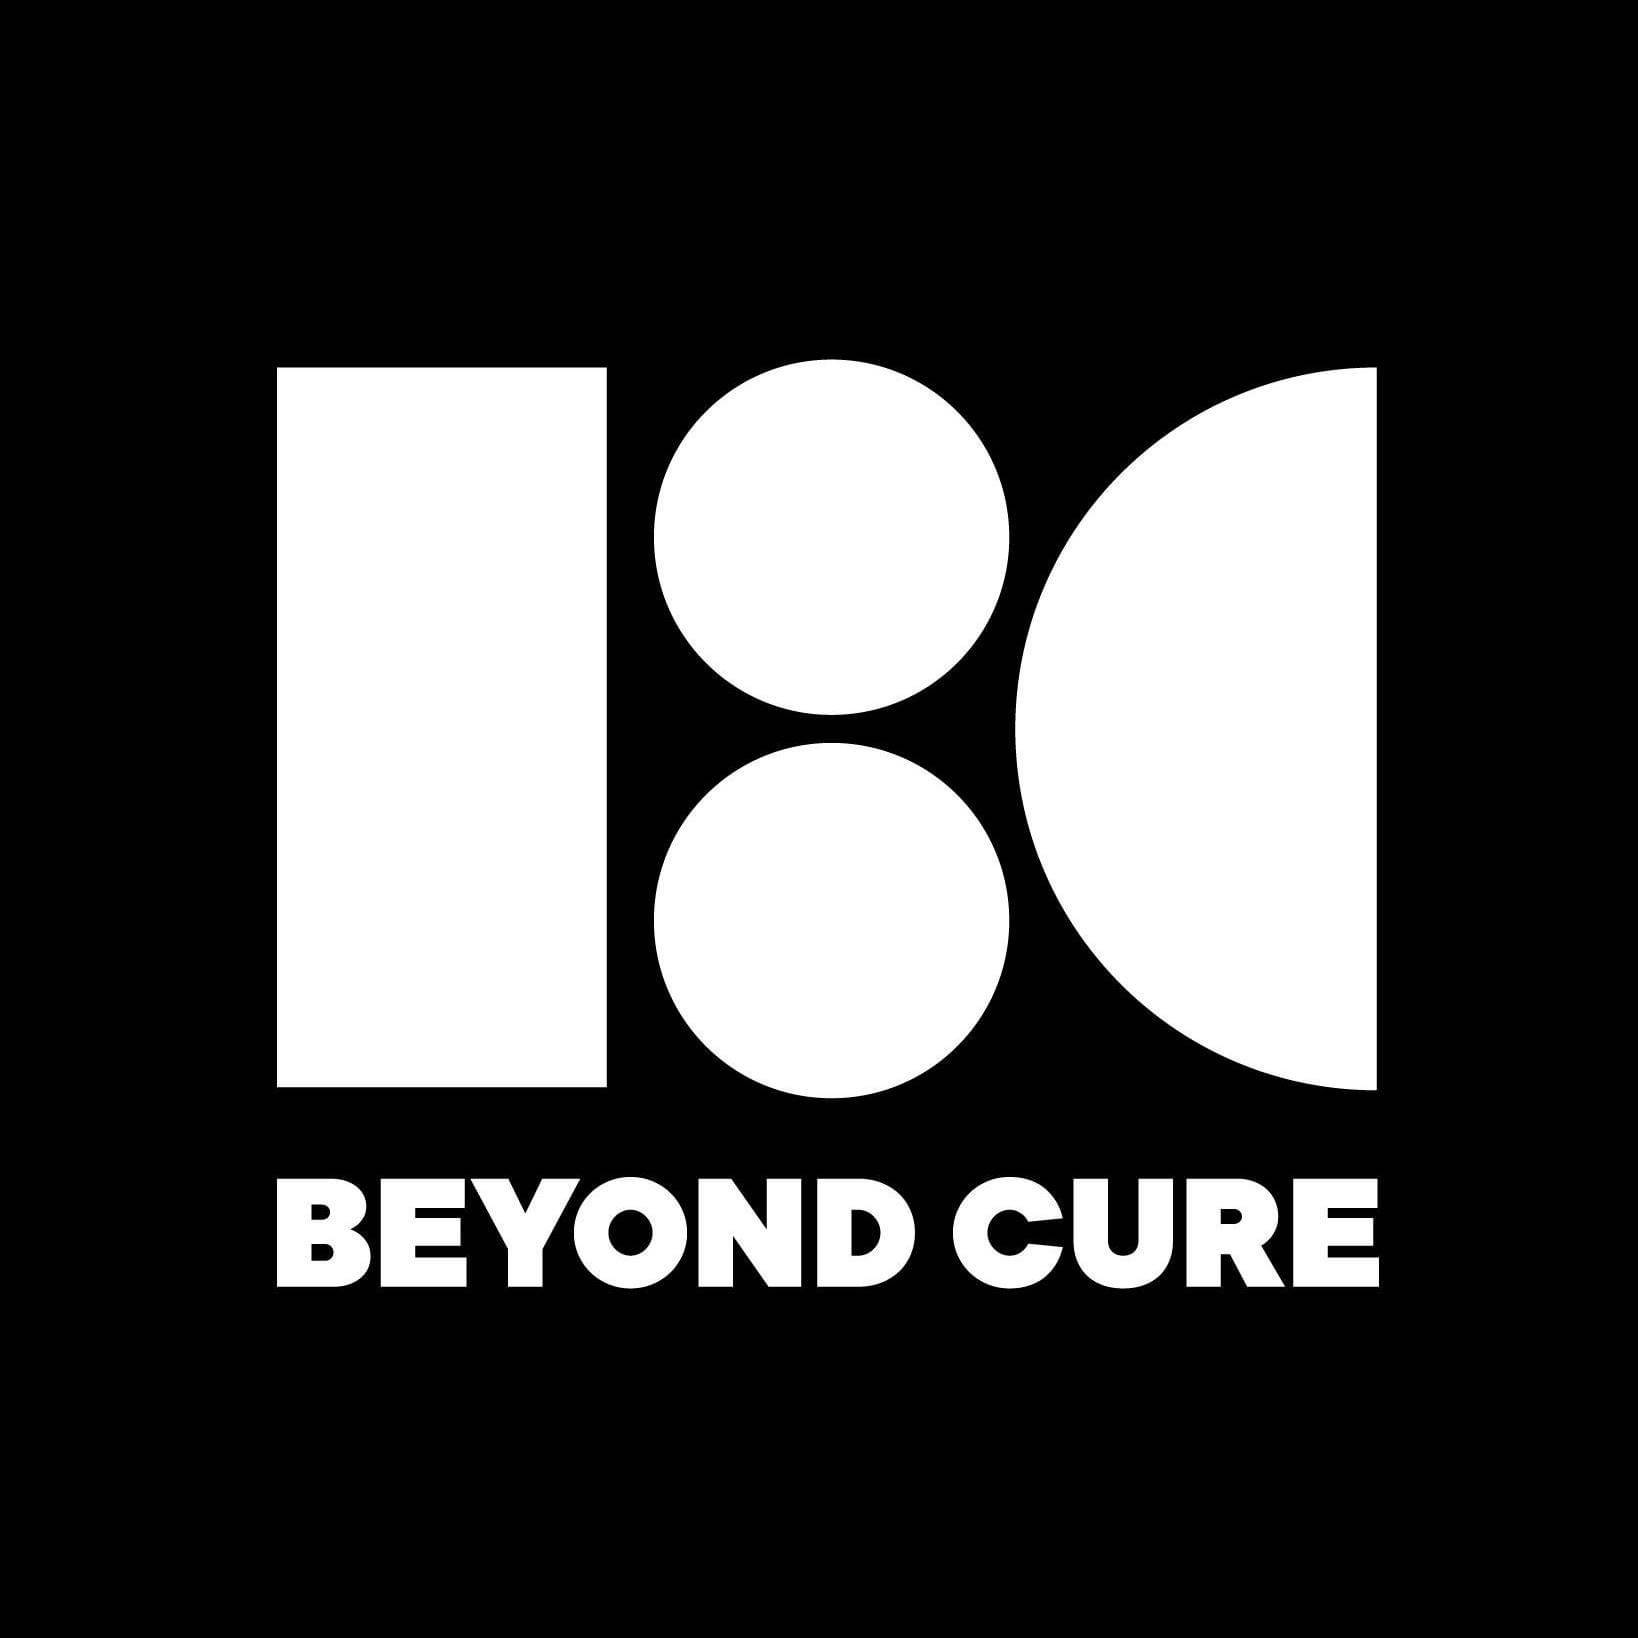 Beyond cure